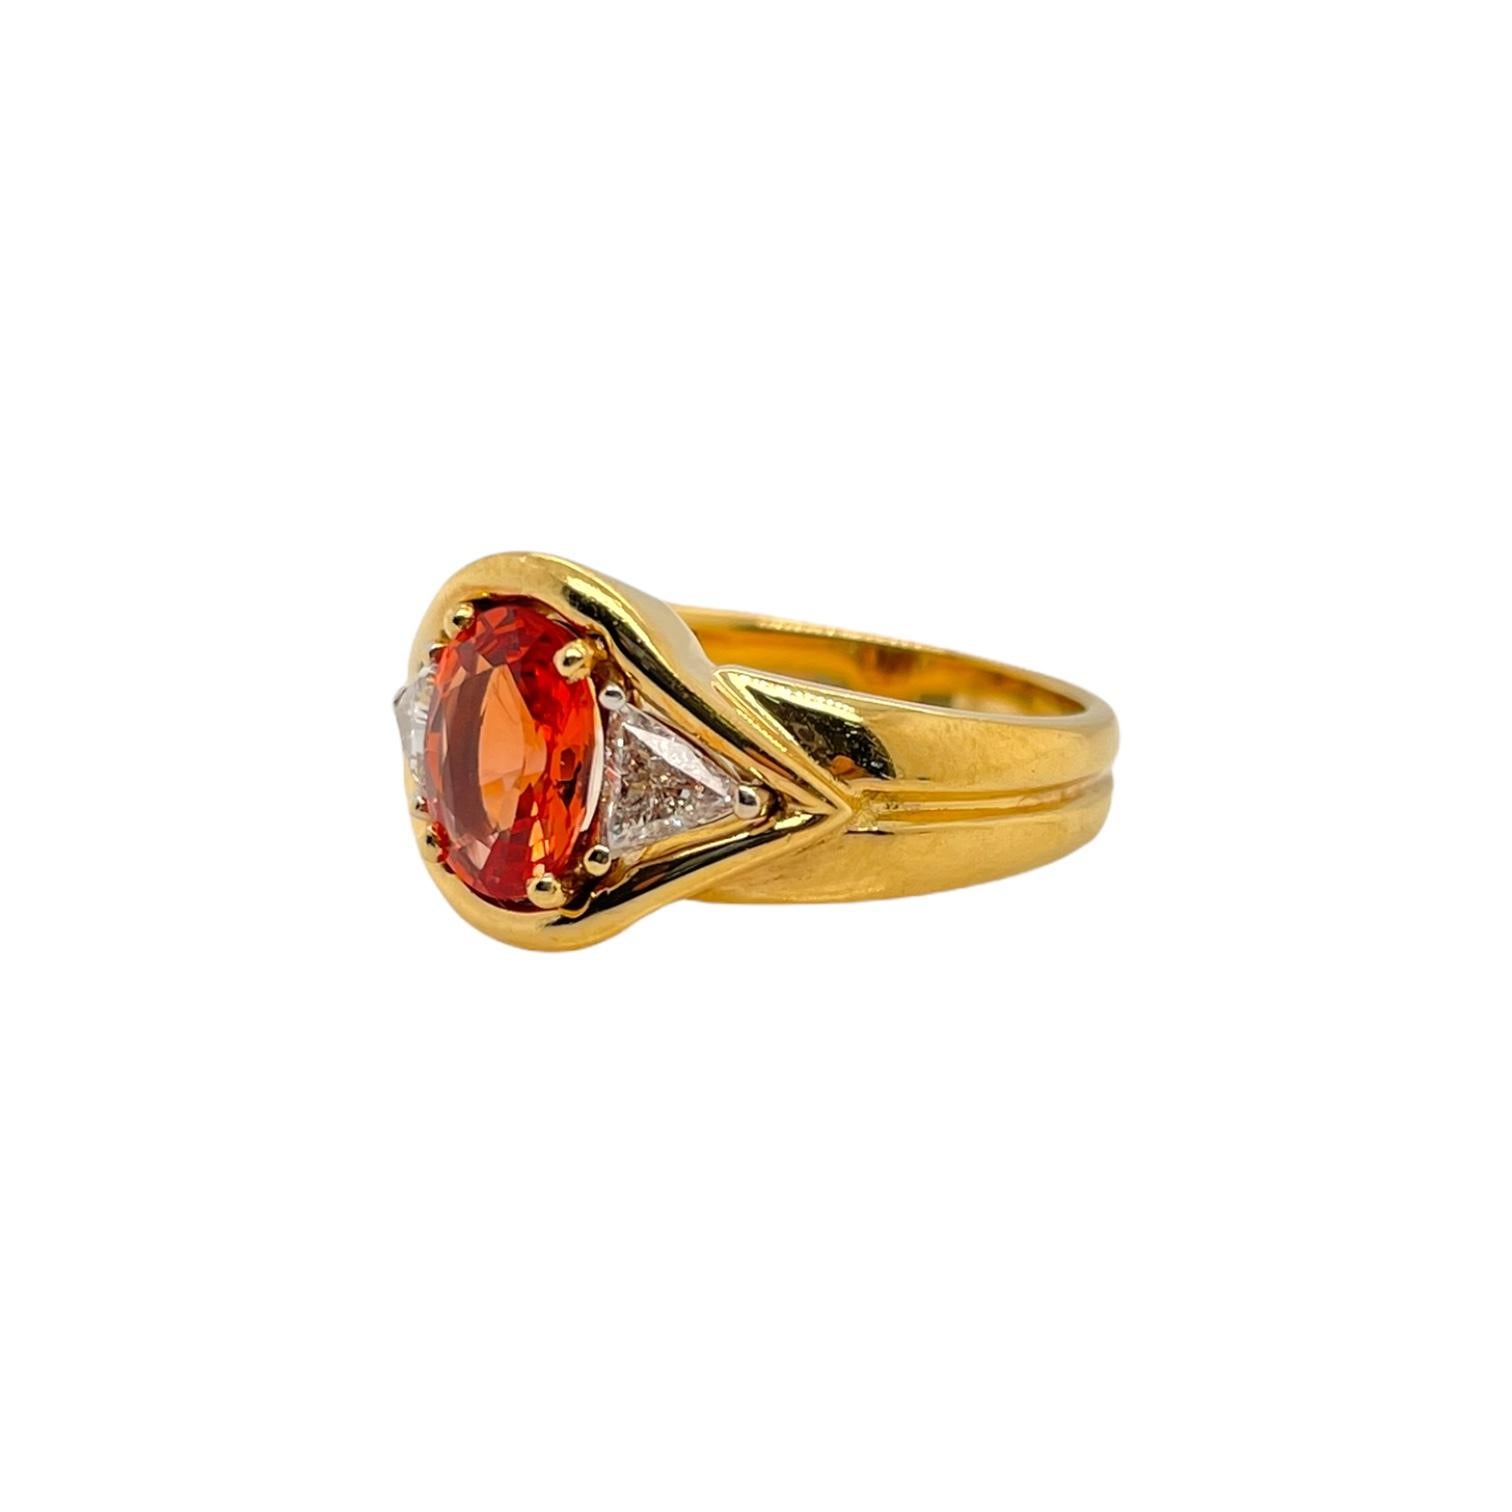 Oval orange sapphire and trillion cut diamond ring in 18k yellow and white gold. Ring contains 1 center 8x6mm oval orange sapphire 1.50ct and two side trillion cut diamonds 0.38tcw. Diamonds are G in color and SI1 in clarity. Stones are mounted in a